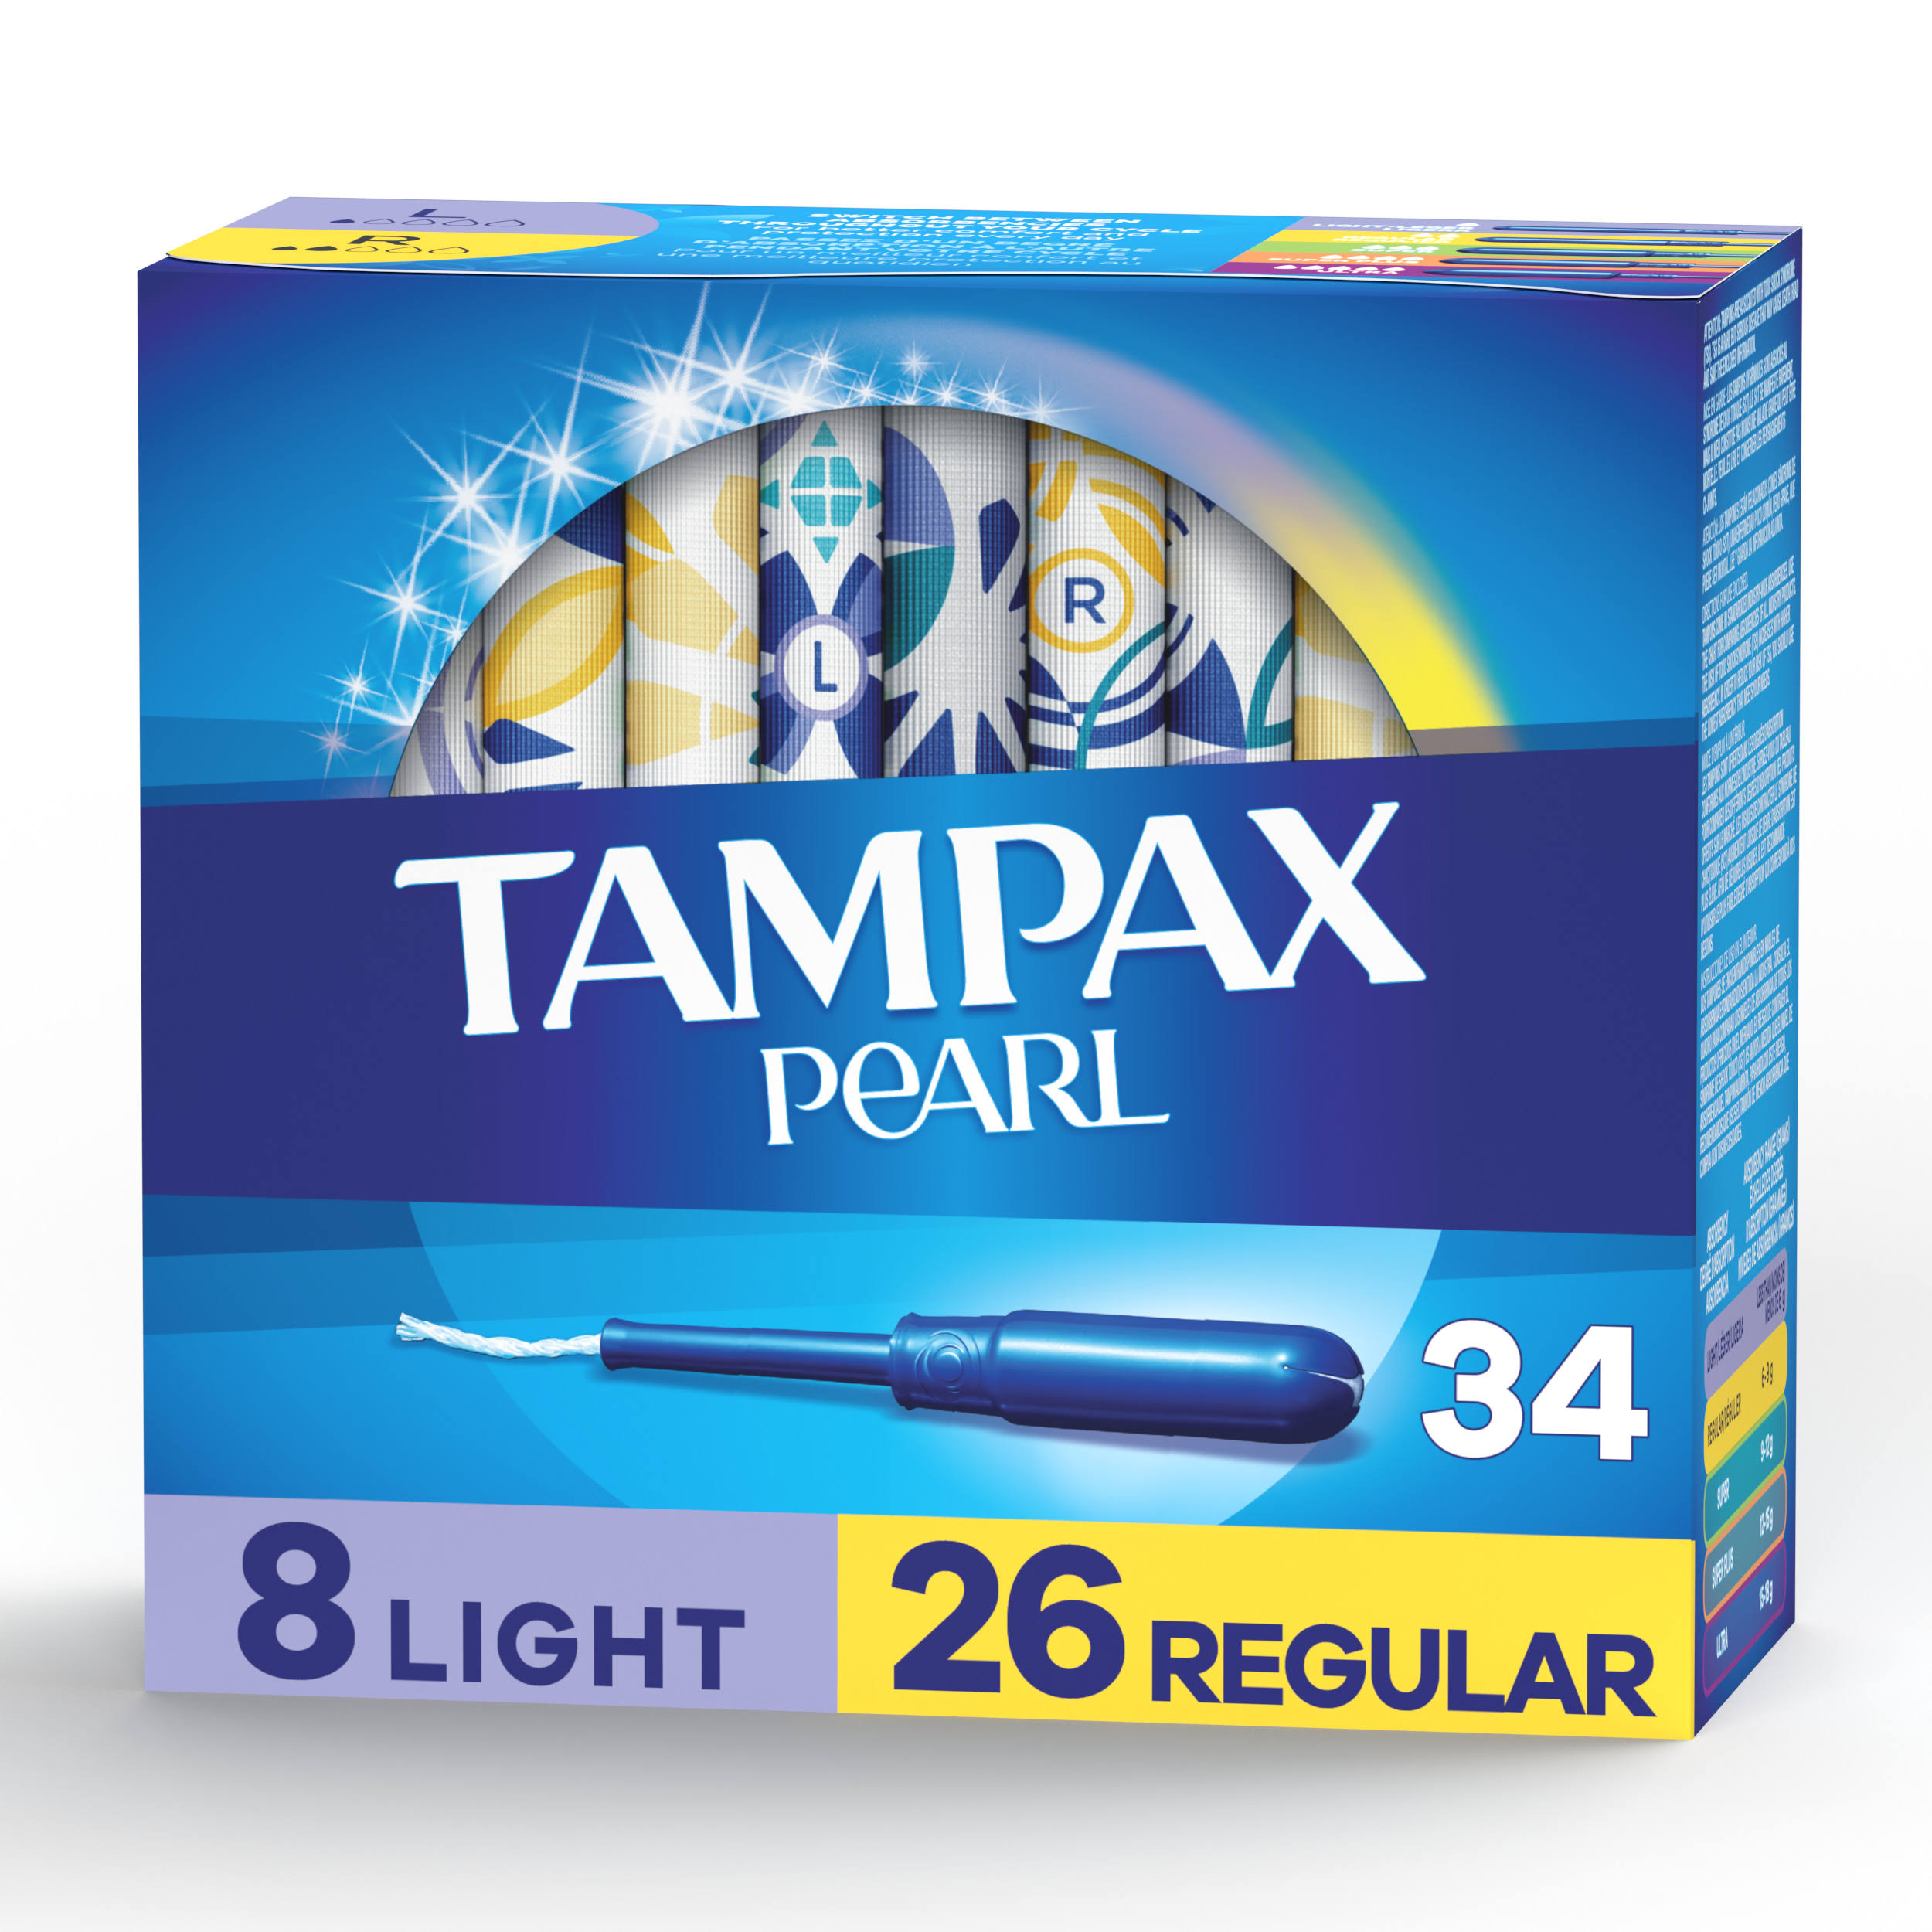 Tampax Pearl Tampons Duo Pack, Light/Regular Absorbency, Unscented